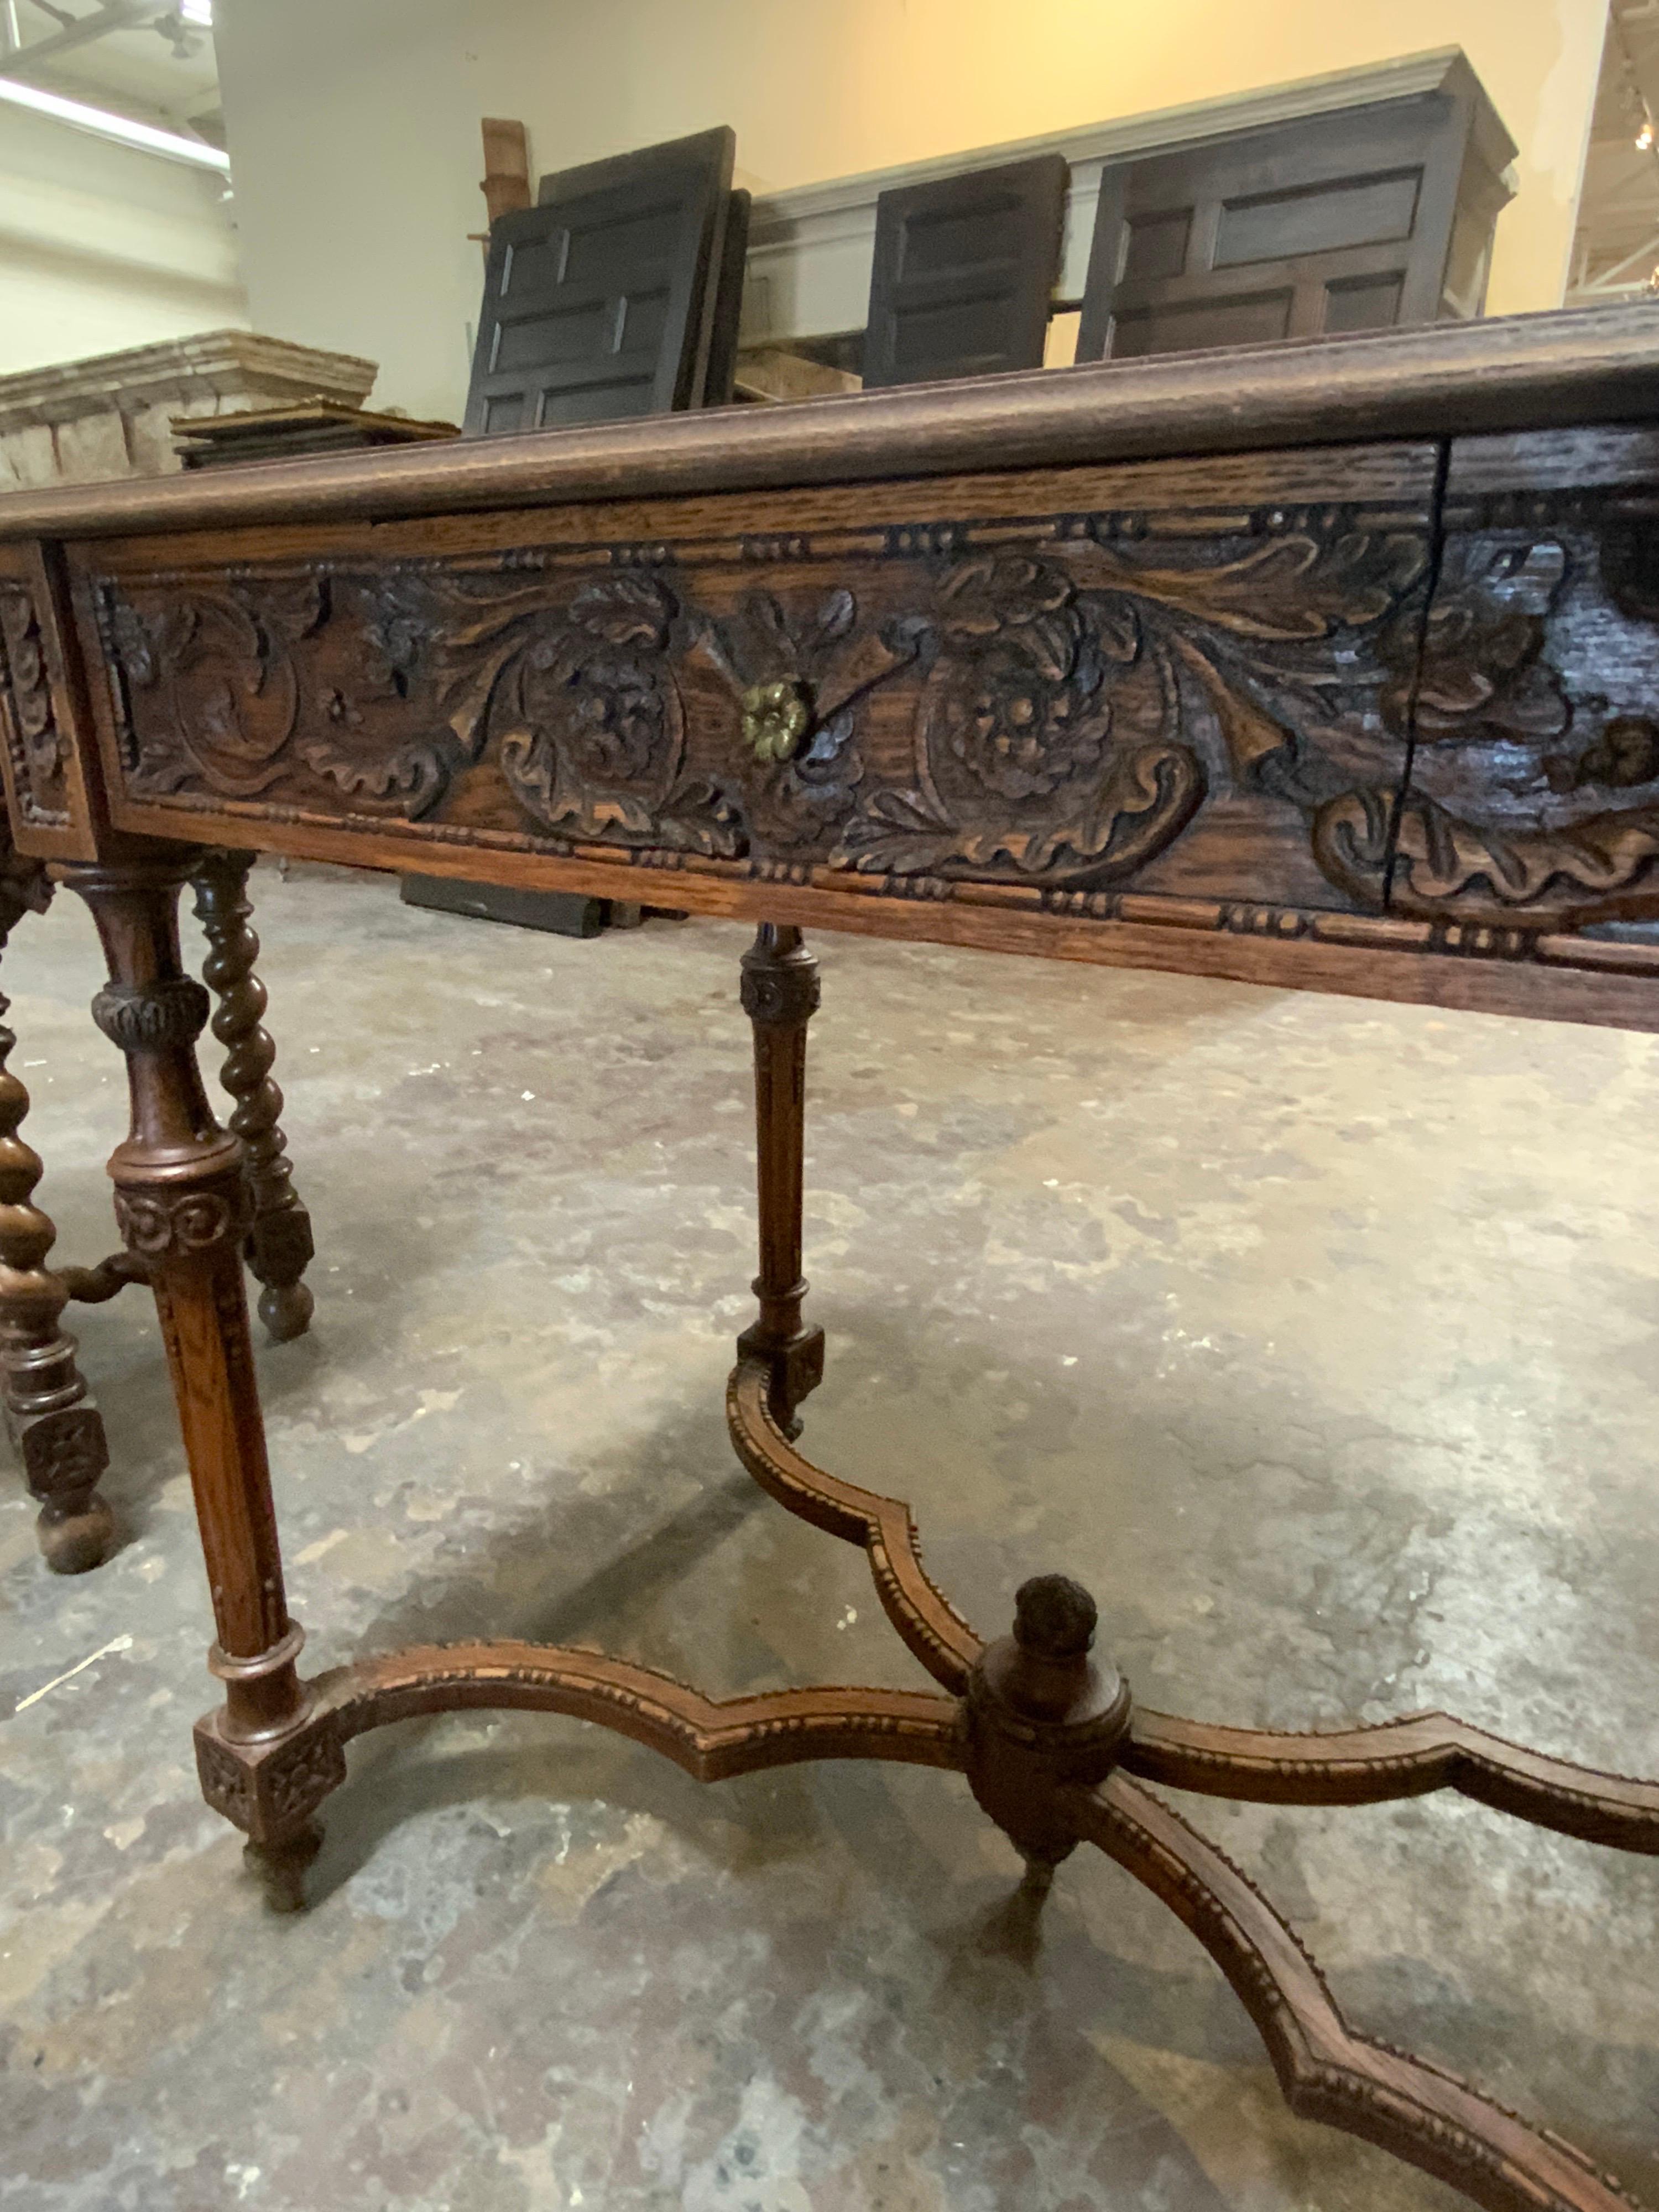 Spanish table made of hand-carved oak wood. Item features front drawer with flower handle. Origin; Spain